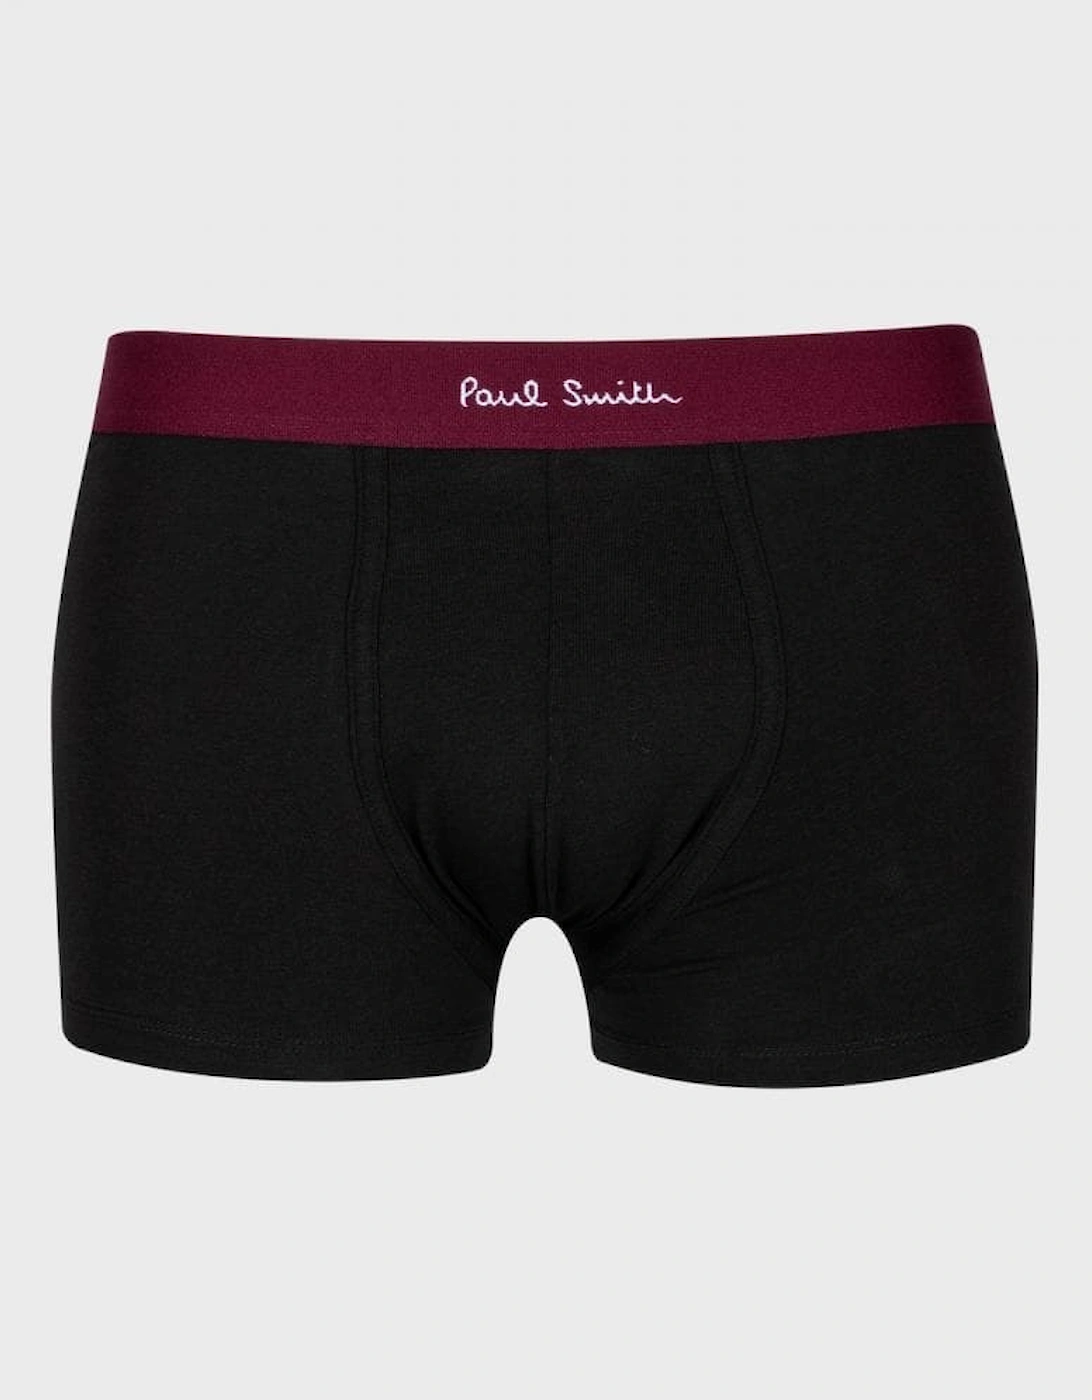 3 Pack Mens Plain Trunks with Coloured Waistbands